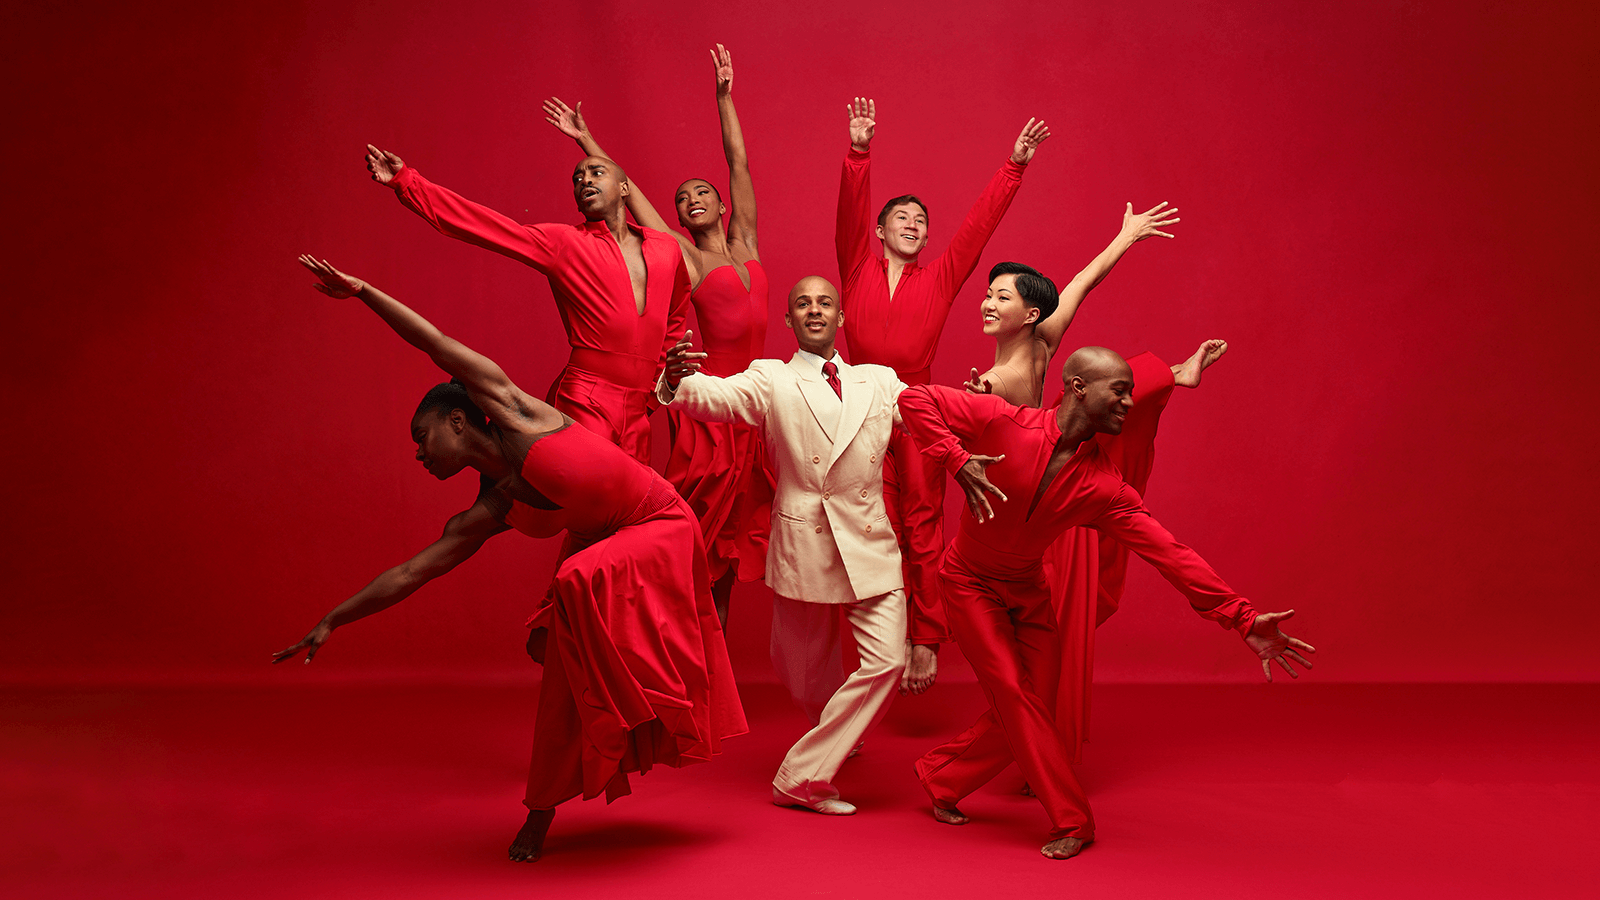 https://www.alvinailey.org/sites/default/files/styles/default_manual_crop/public/2023-12/1600x900Members%20of%20the%20Company%20in%20Alvin%20Ailey%27s%20For%20%27Bird%27%20-%20With%20Love.%20Photo%20by%20Dario%20Calmese_007.png?itok=iFcXEVI-